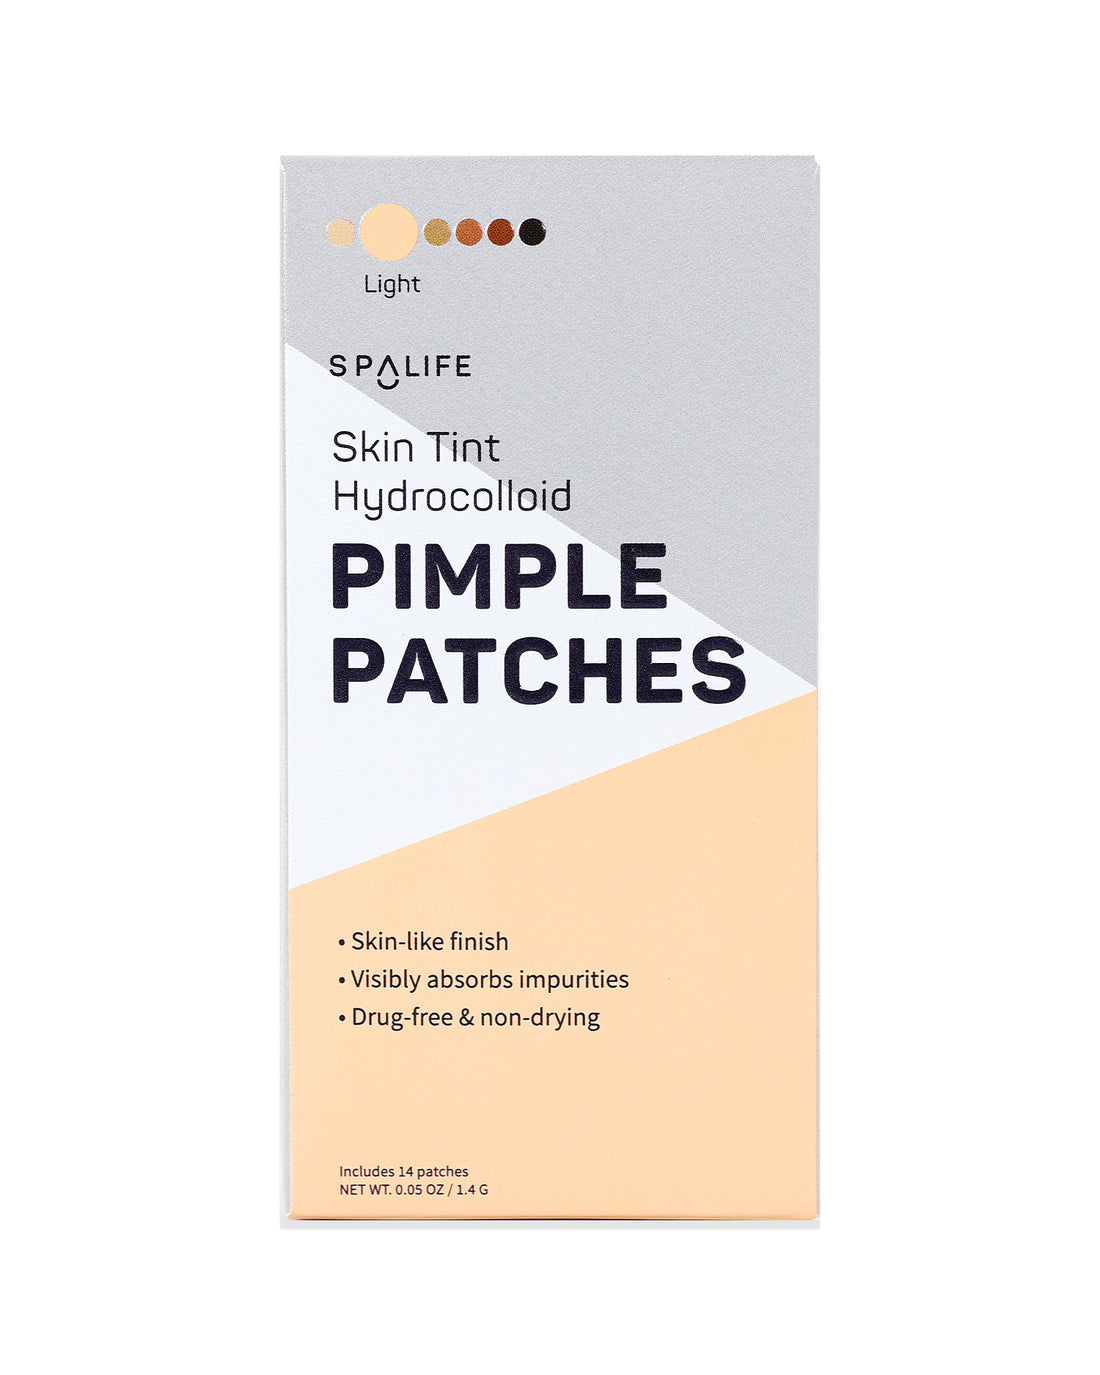 Skin_tint_pimple_patches_packe-448